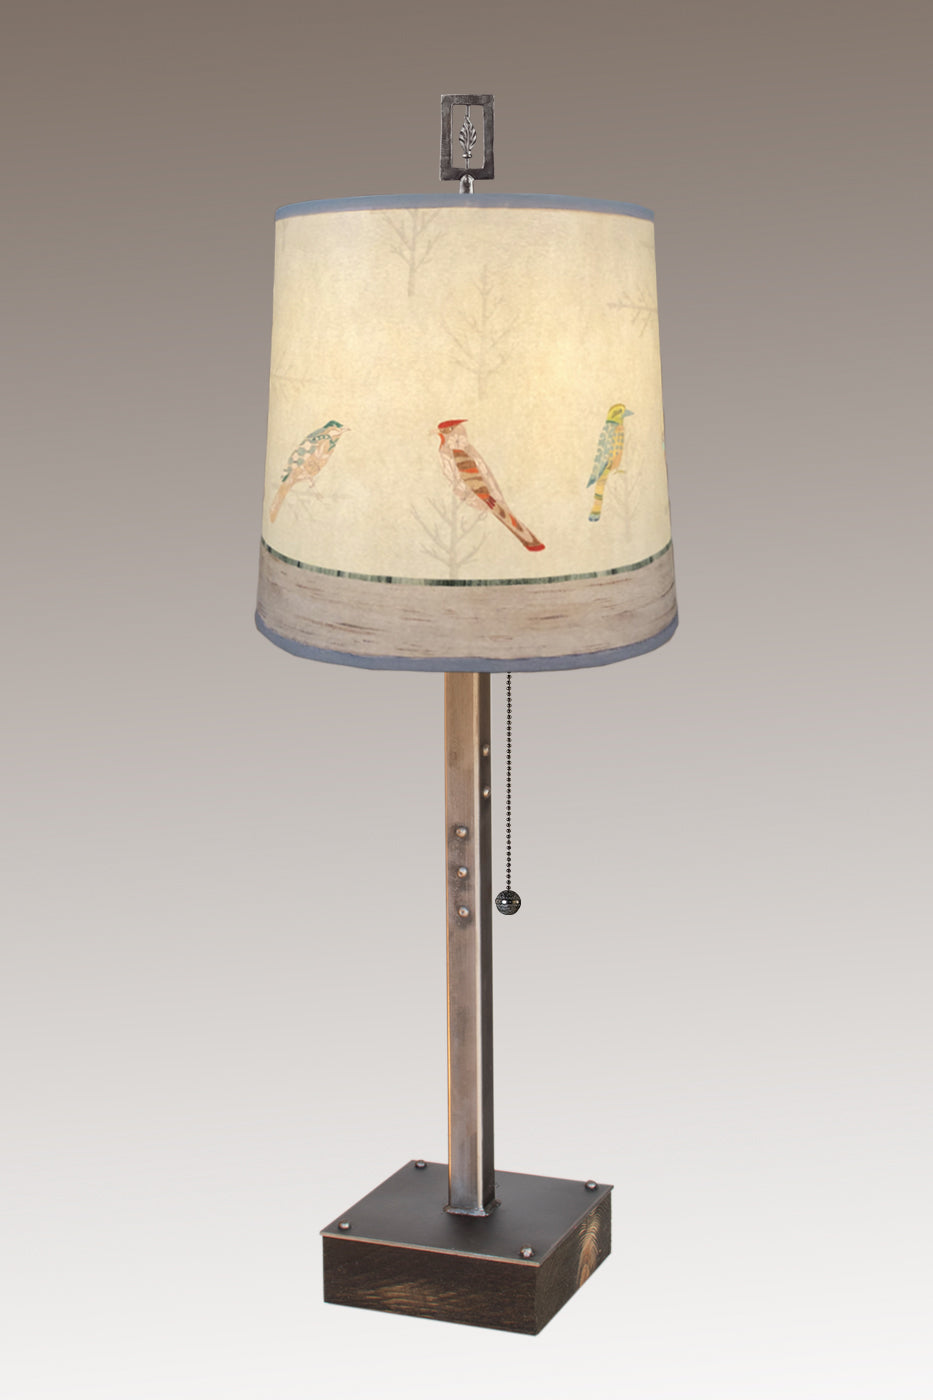 Janna Ugone & Co Table Lamps Steel Table Lamp on Wood with Medium Drum Shade in Bird Friends